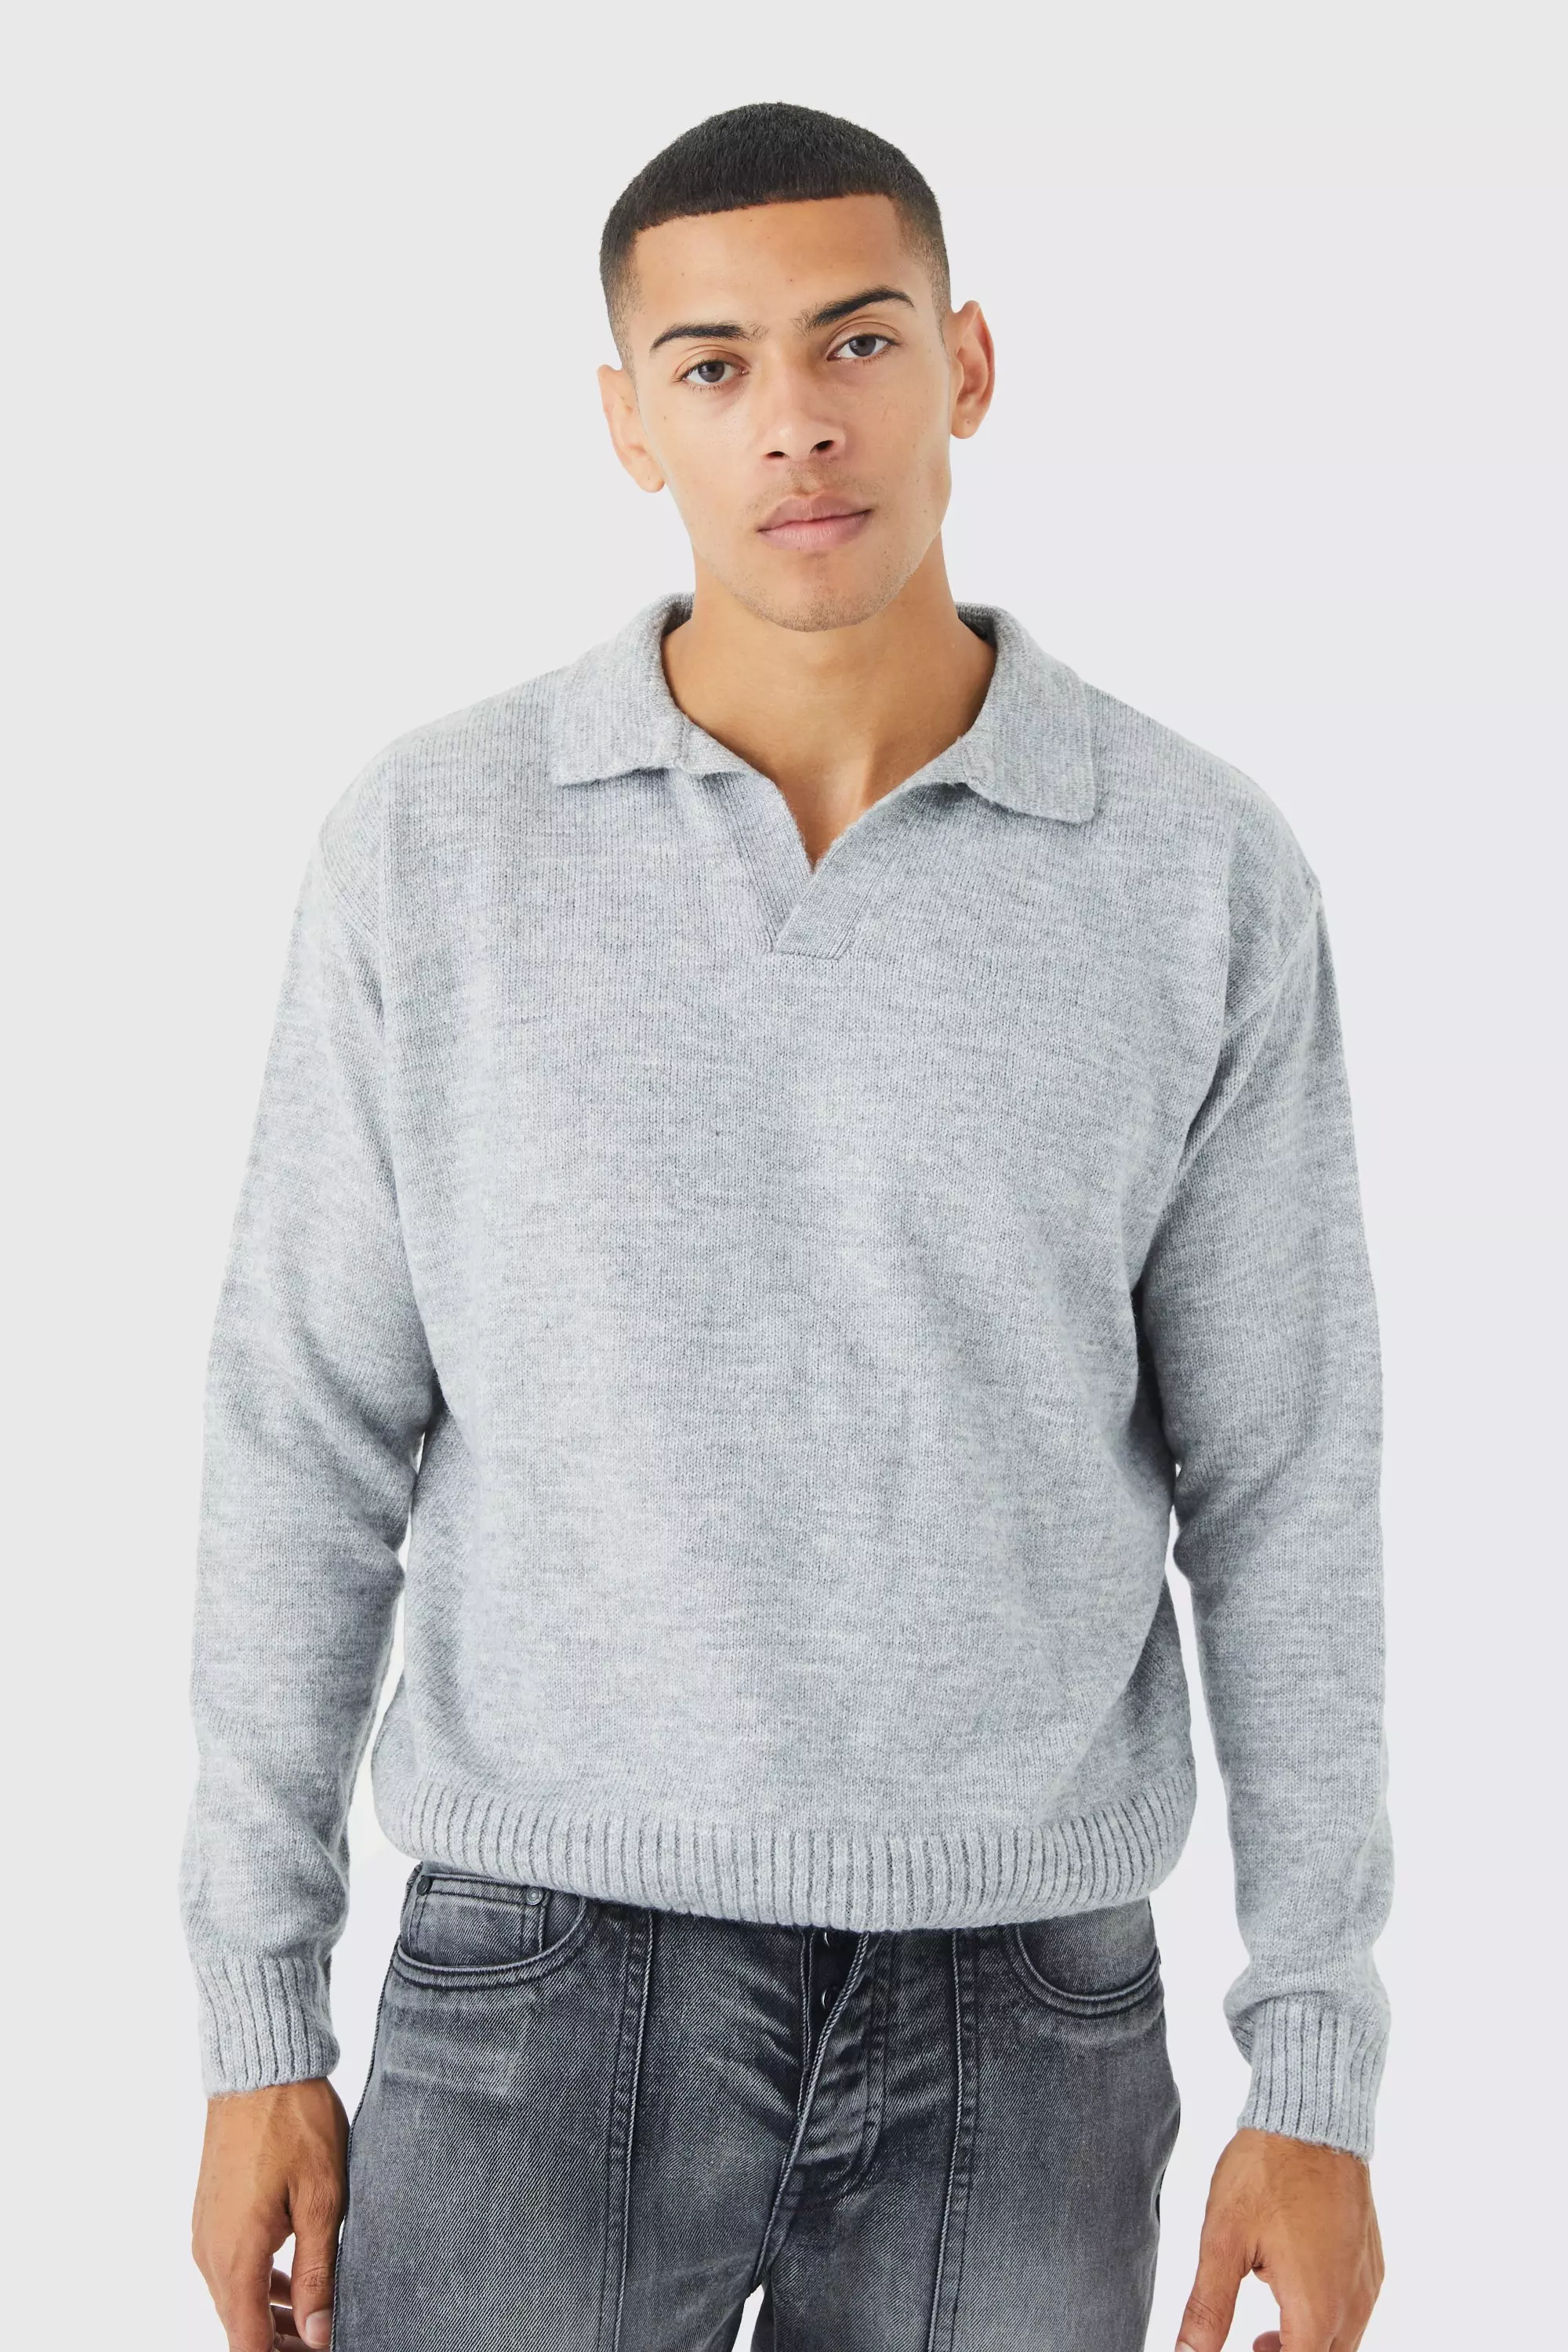 Boxy Long Sleeve Knitted Revere Polo Grey marl